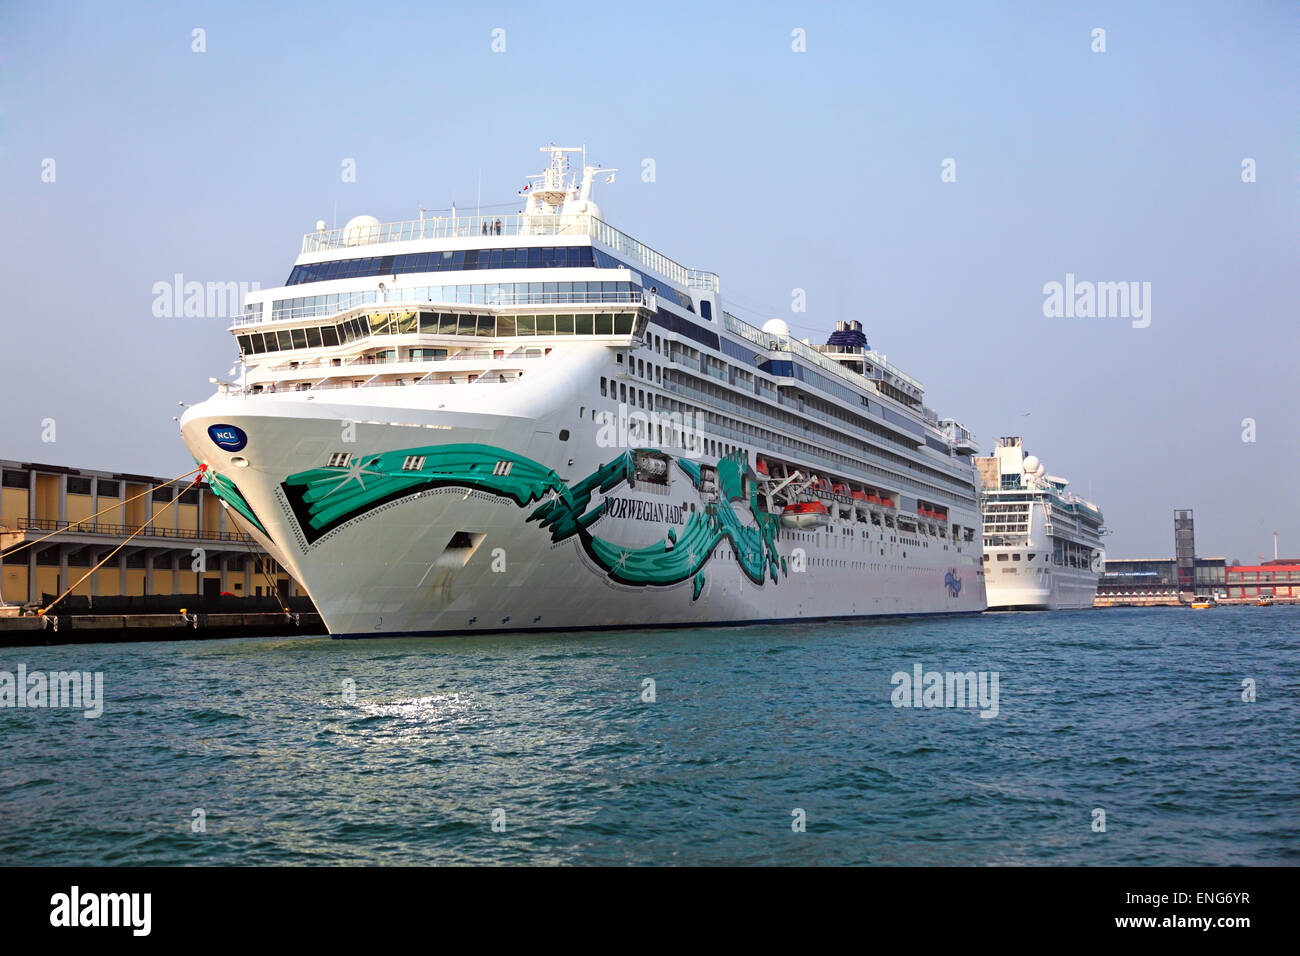 Norwegian Jade Cruise Ship High Resolution Stock Photography and Images -  Alamy